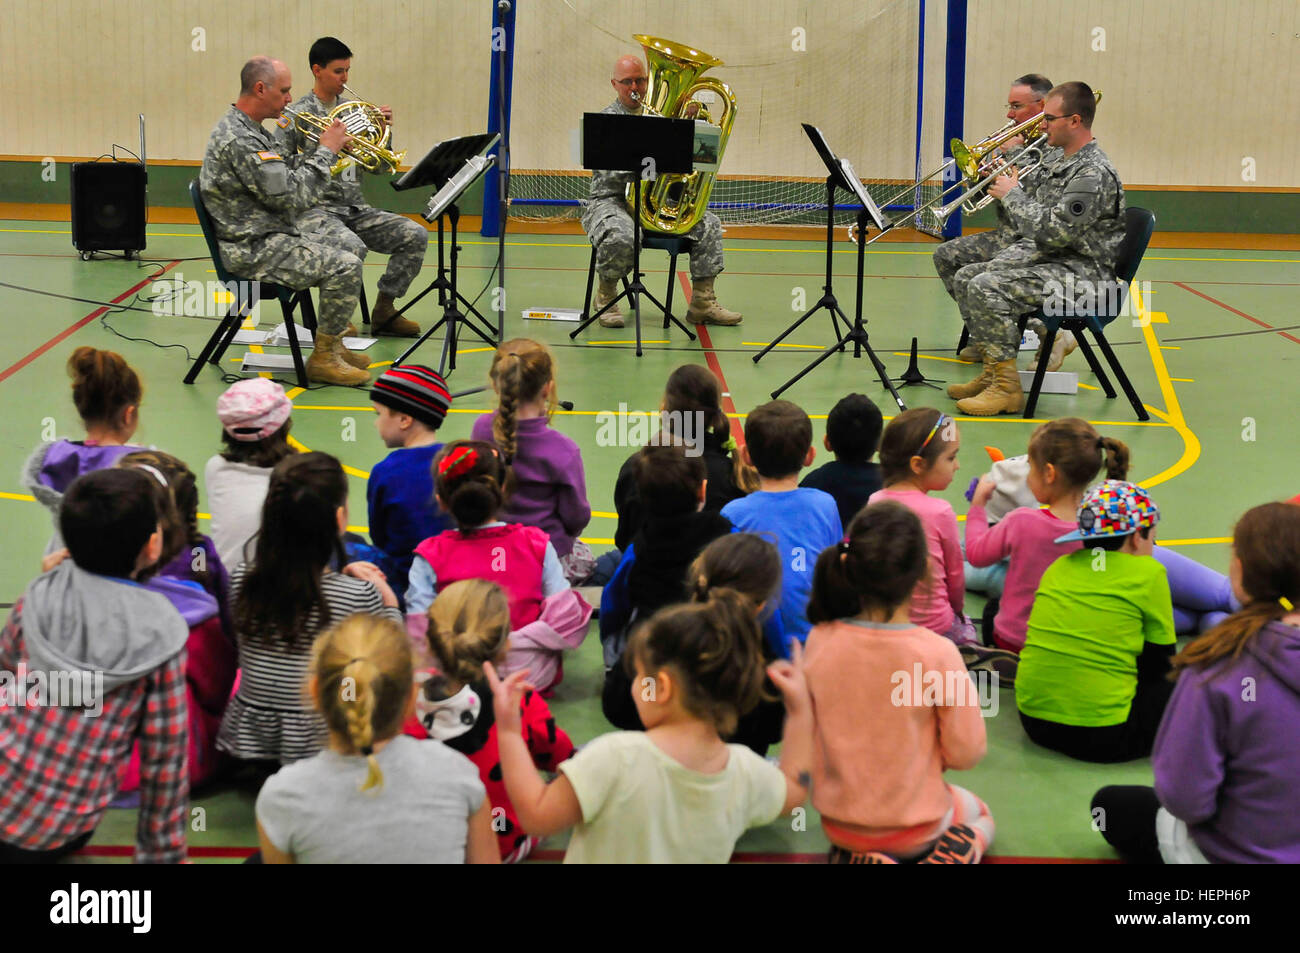 Soldiers from the 56th Army Band, I Corps, perform various songs highlighting how each instrument sounds in the brass quintet for children in a stay safe summer program at the Police Citizens Youth Club in Nambour, Australia, July 10. 56th Army Band provides musical education for Australian youth 150710-A-UG106-354 Stock Photo